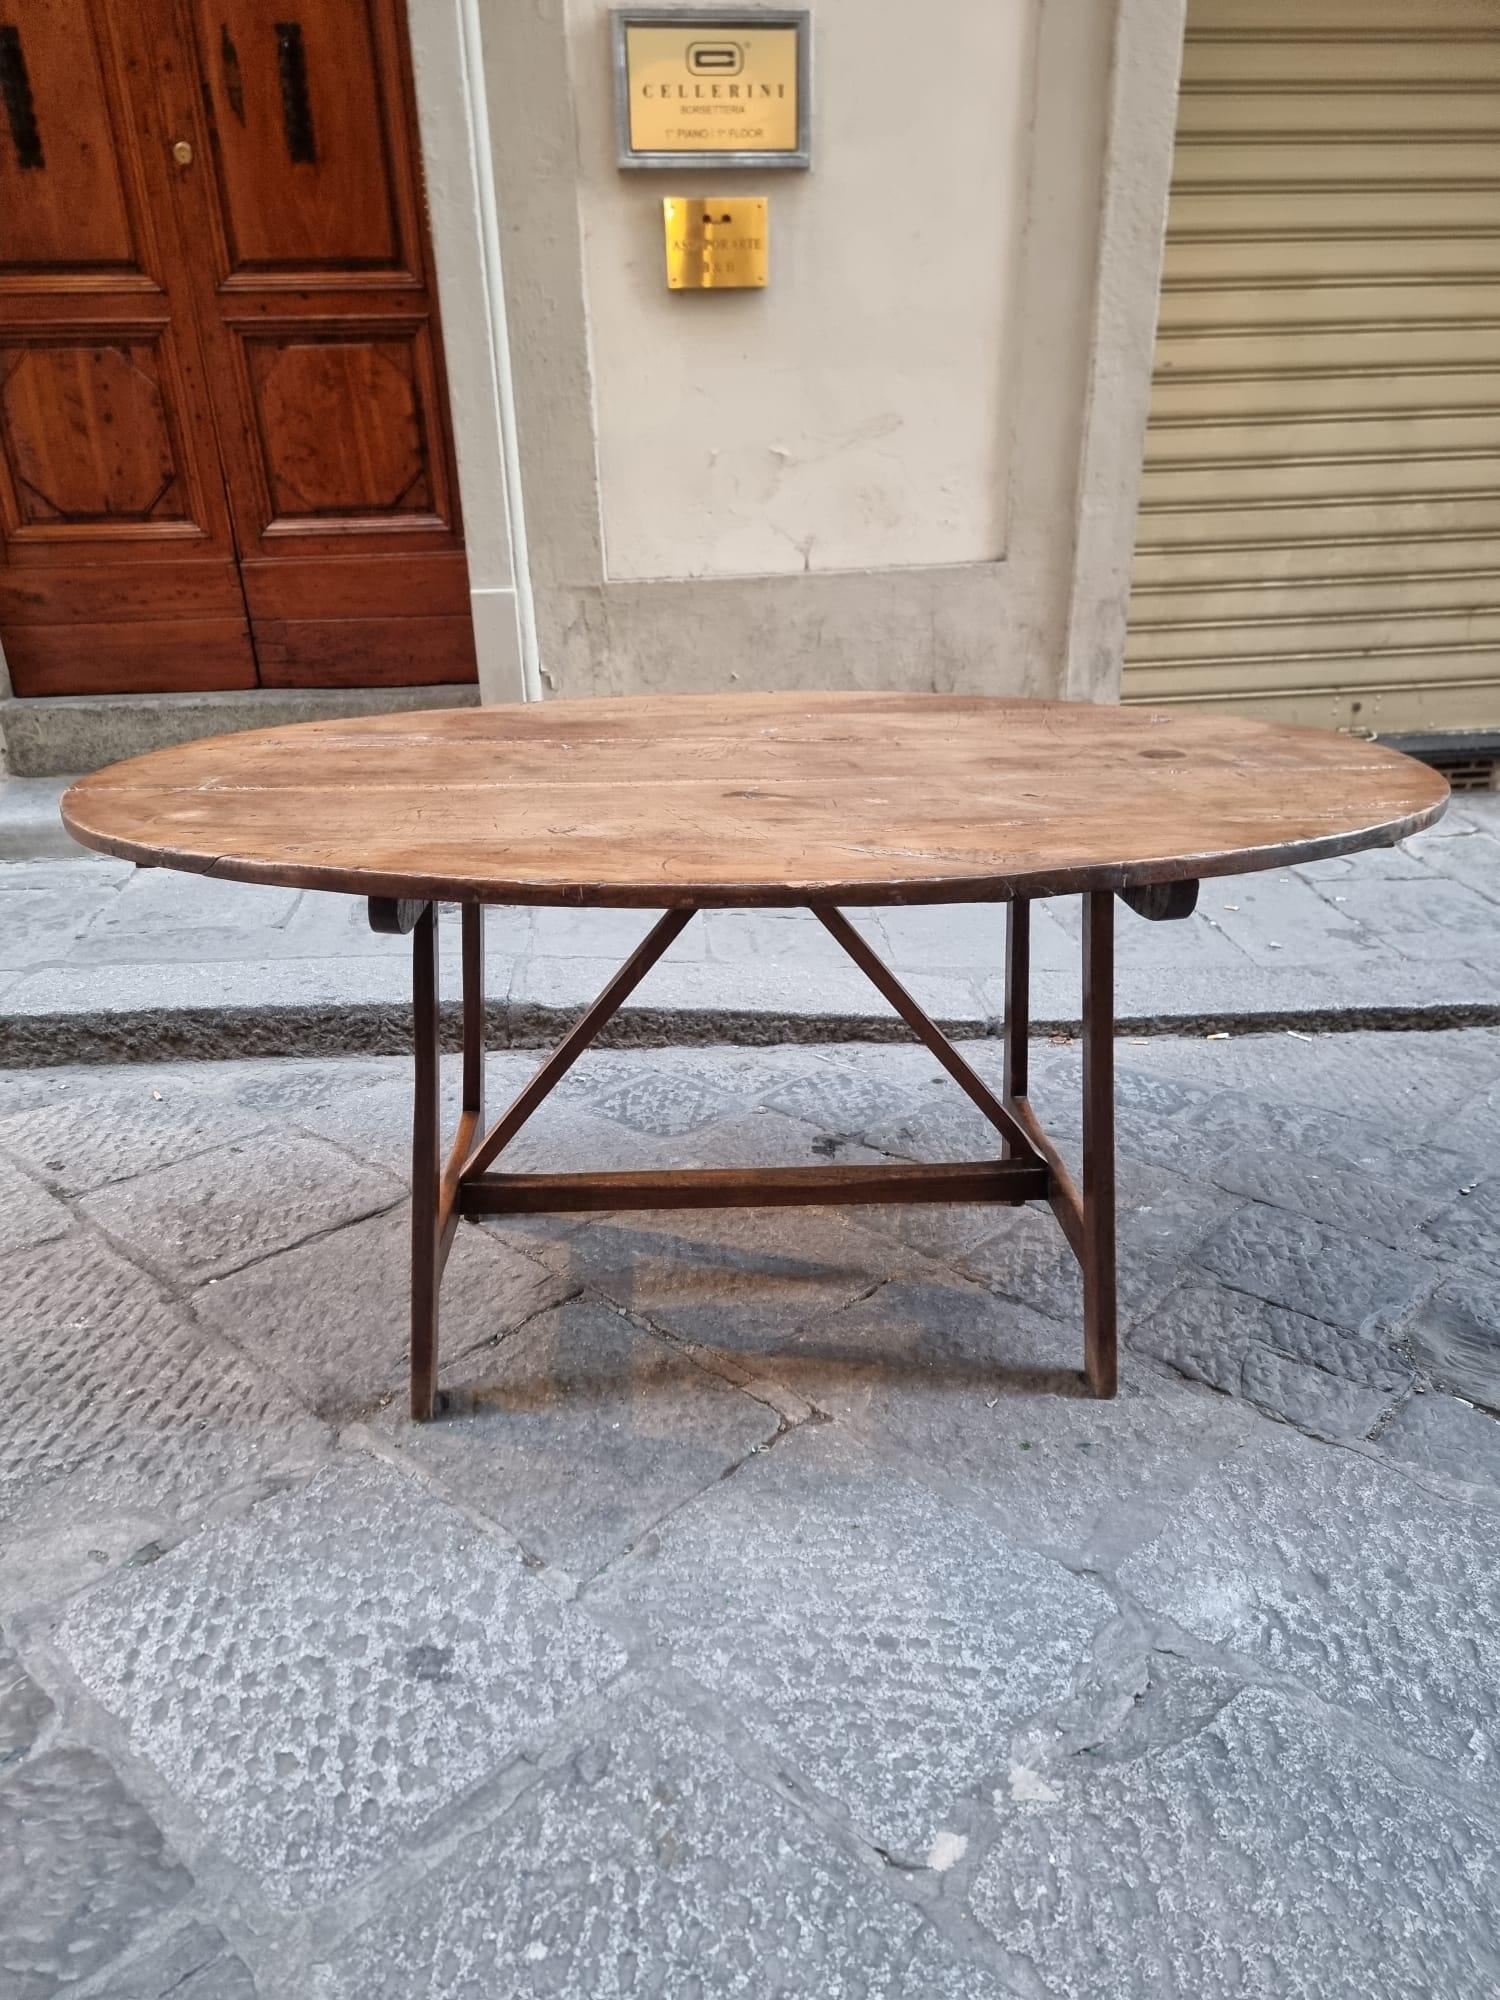 Oval table shaped in goat legs , in walnut wood, 18th century. Central Italy, Tuscany.

The extensions and irons are not original.

The table needs restoration which will be carried out by us through our professional restorers.
